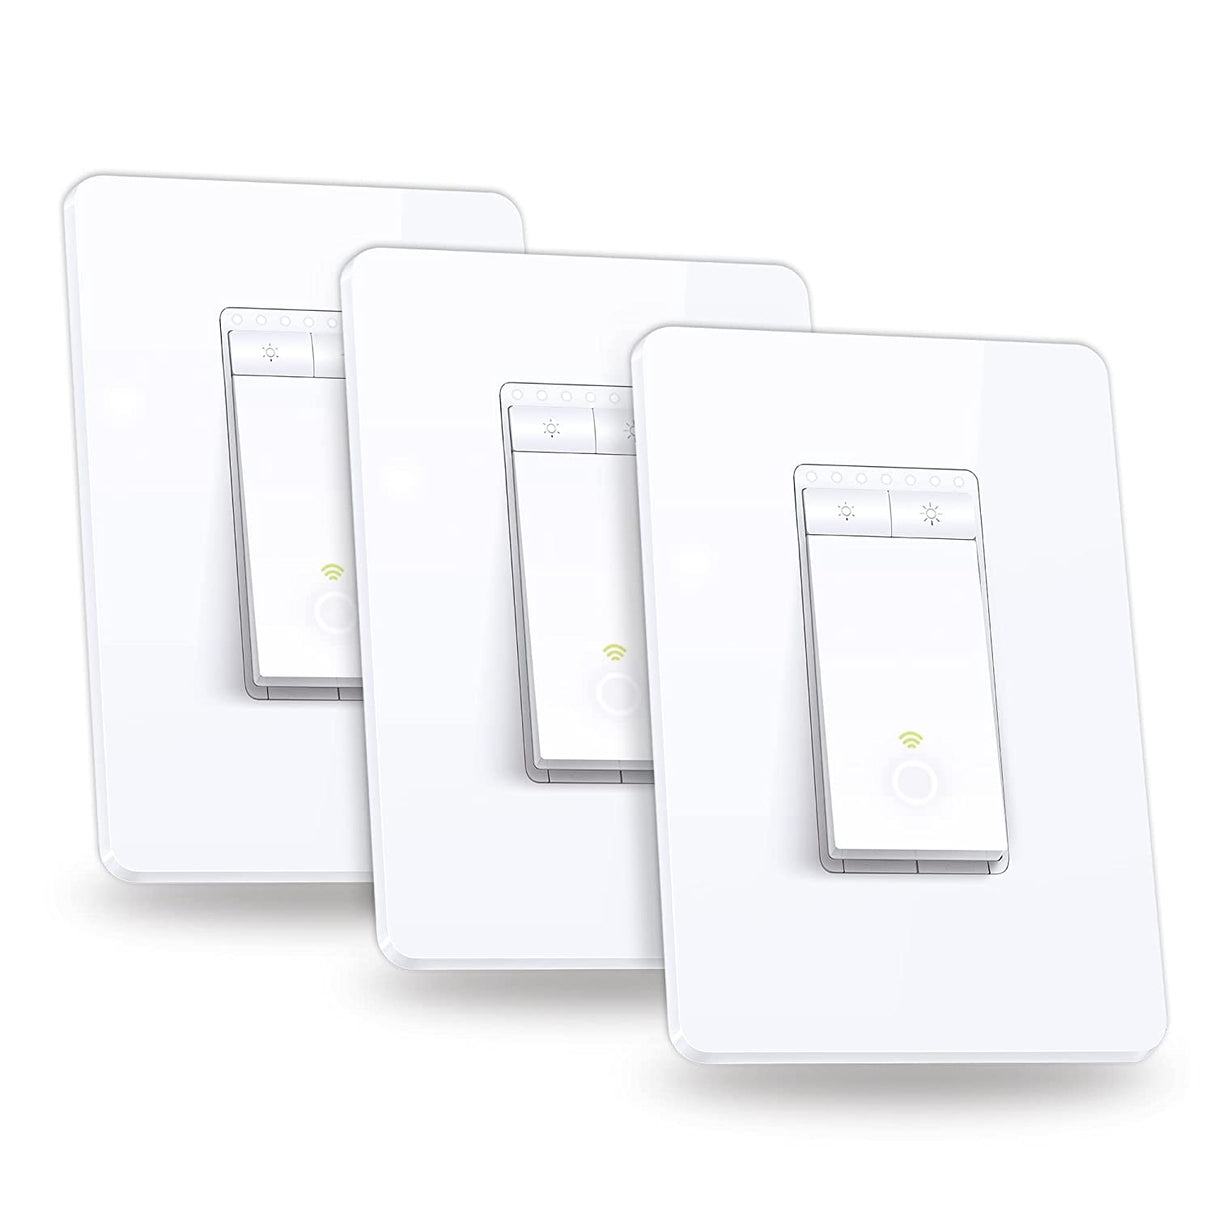 Kasa Smart Dimmer Switch HS220P3, Single Pole, Needs Neutral Wire, 2.4GHz Wi-Fi Light Switch Works with Alexa and Google Home, UL Certified,, No Hub Required, 3-Pack Dimmer 3-Pack